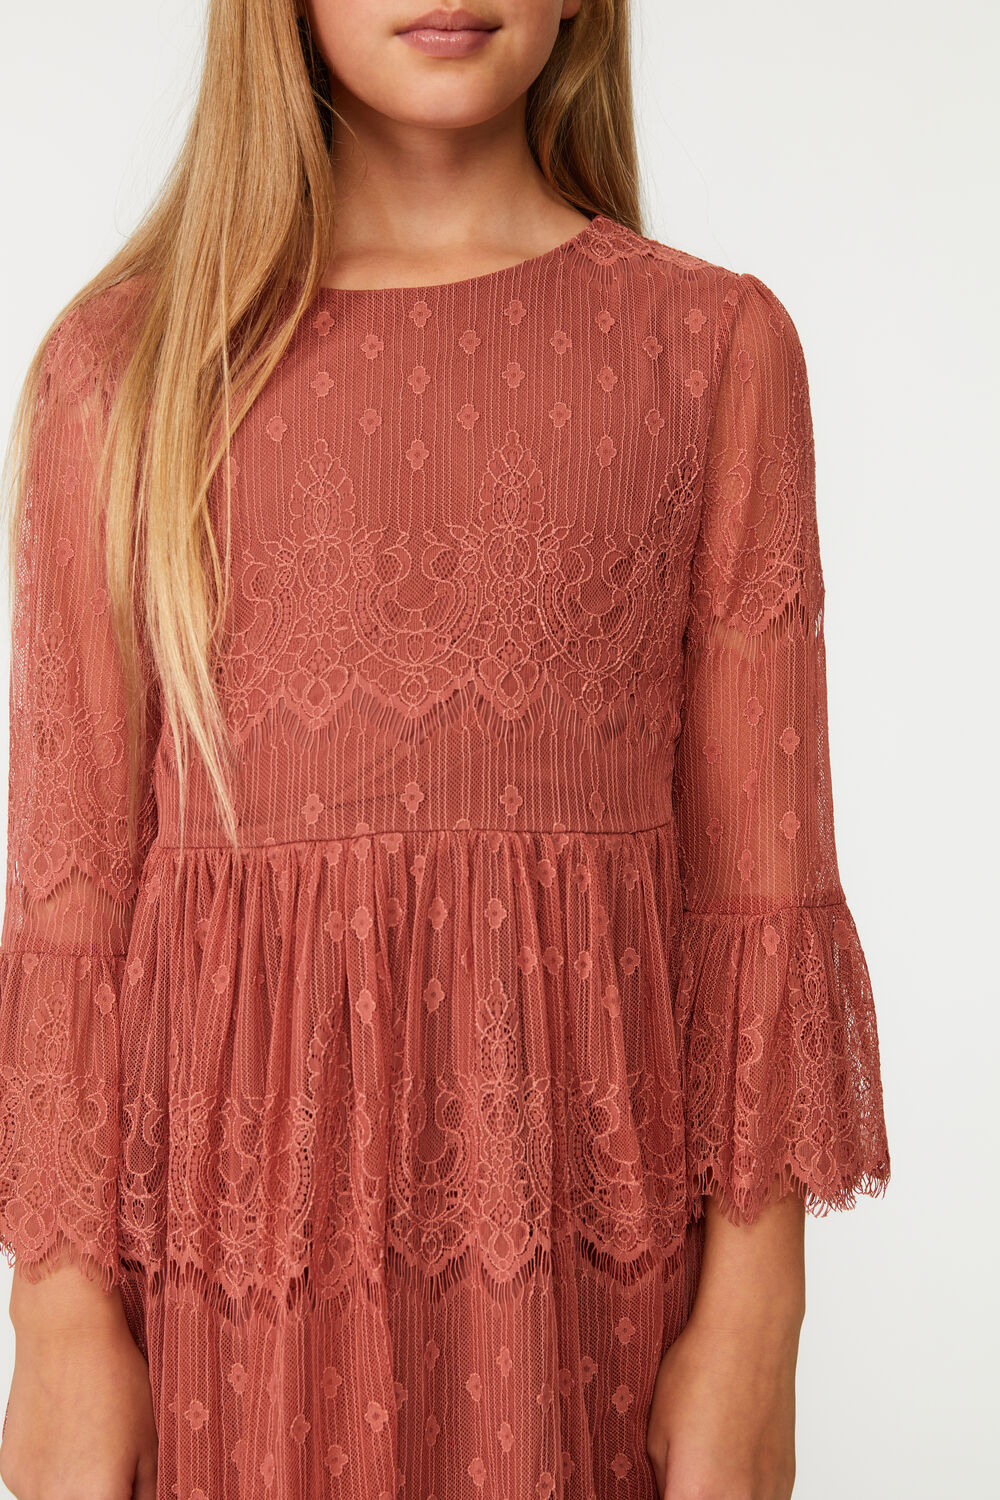 Girls LIANNI LACE DRESS in colour MELLOW ROSE